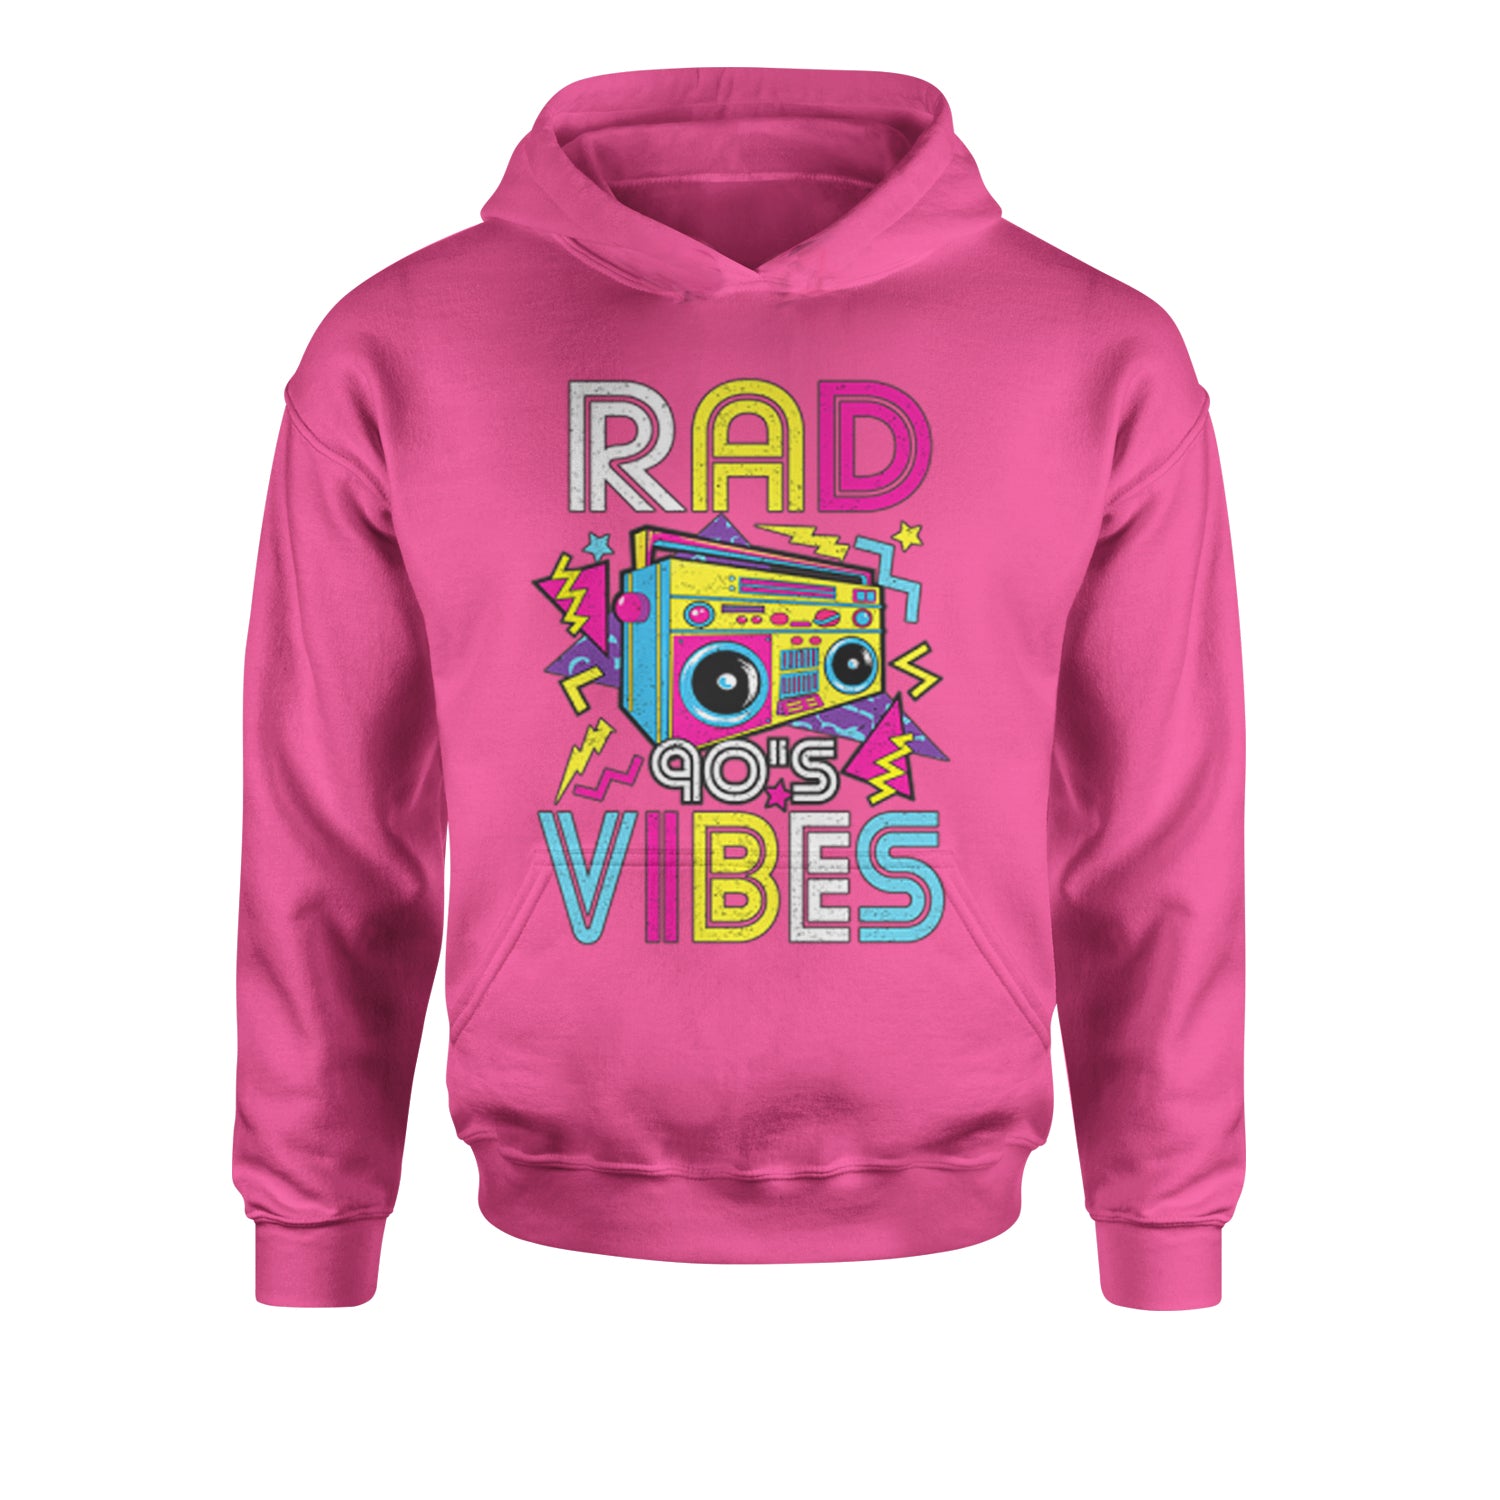 Rad 90's Vibes Youth-Sized Hoodie 90s, gen, genz, millenials, nineties, z by Expression Tees